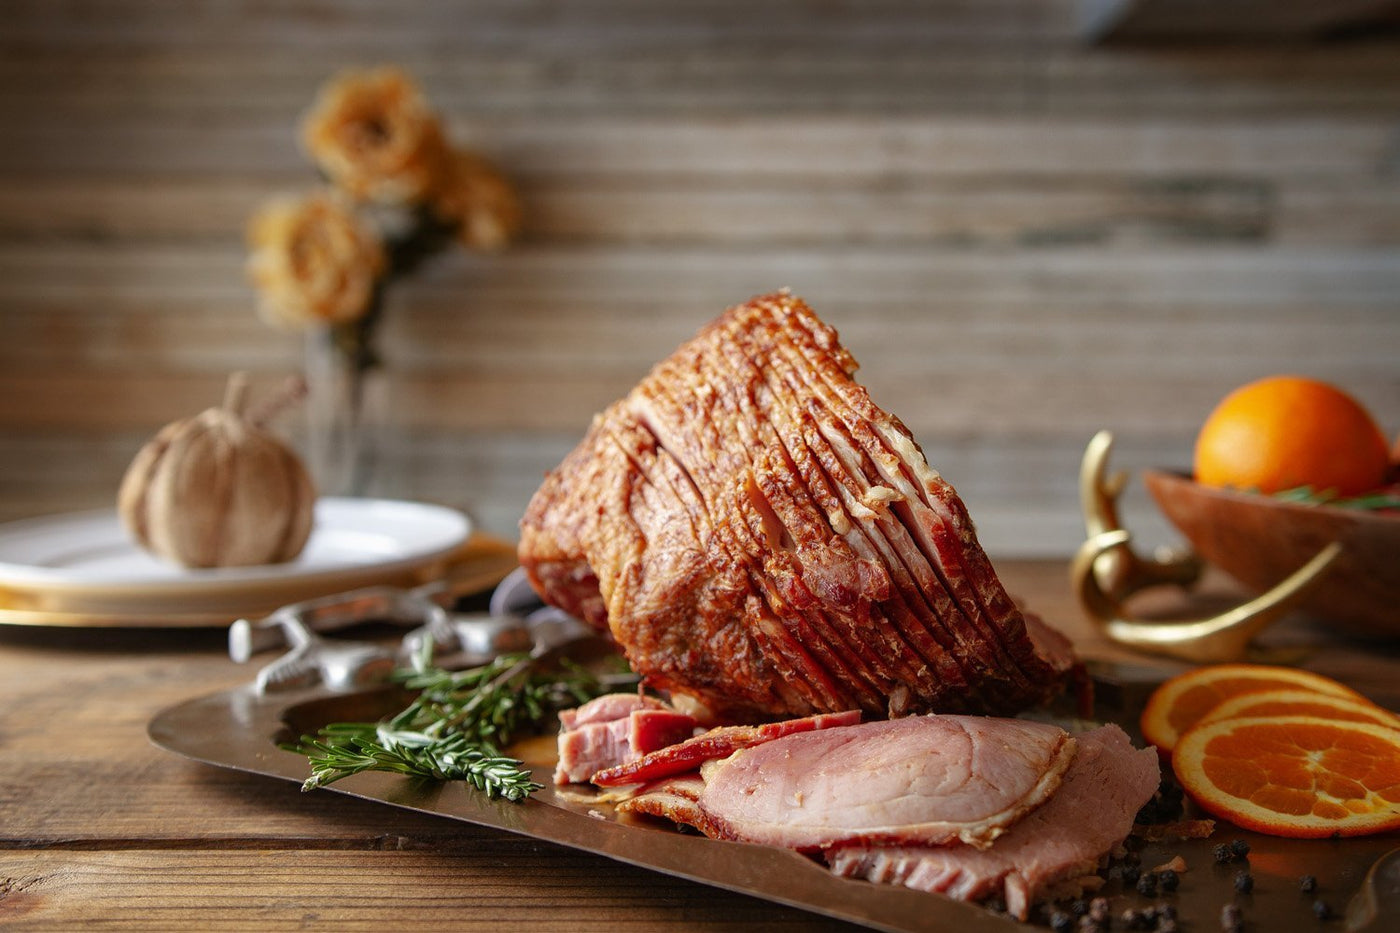 How To Cook A Ham | Pederson's Natural Farms